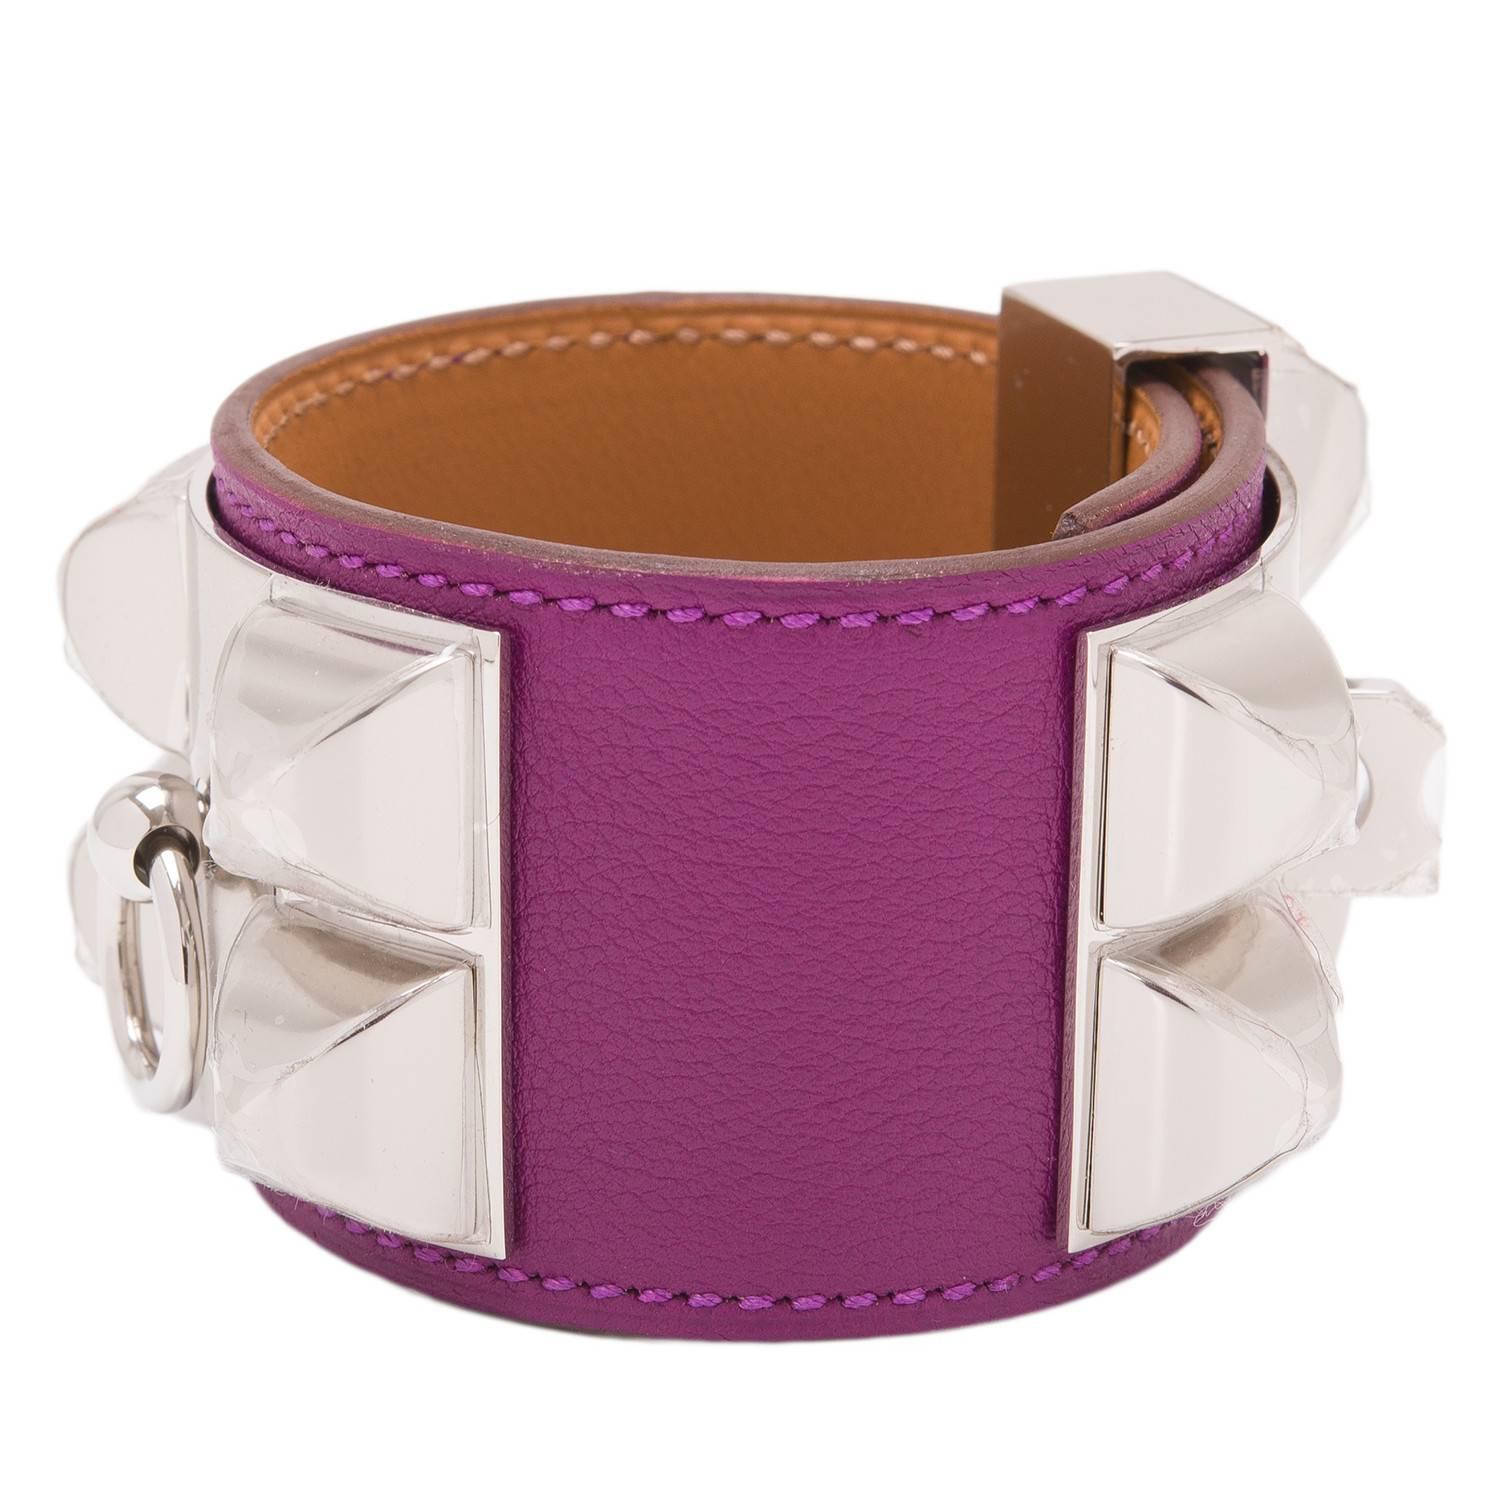 Hermes Collier de Chien (CDC) in Anemone swift leather with palladium plated hardware in size small.

This style features palladium pyramid studs, center ring and adjustable push lock closure.

Collection: Q square

Origin: